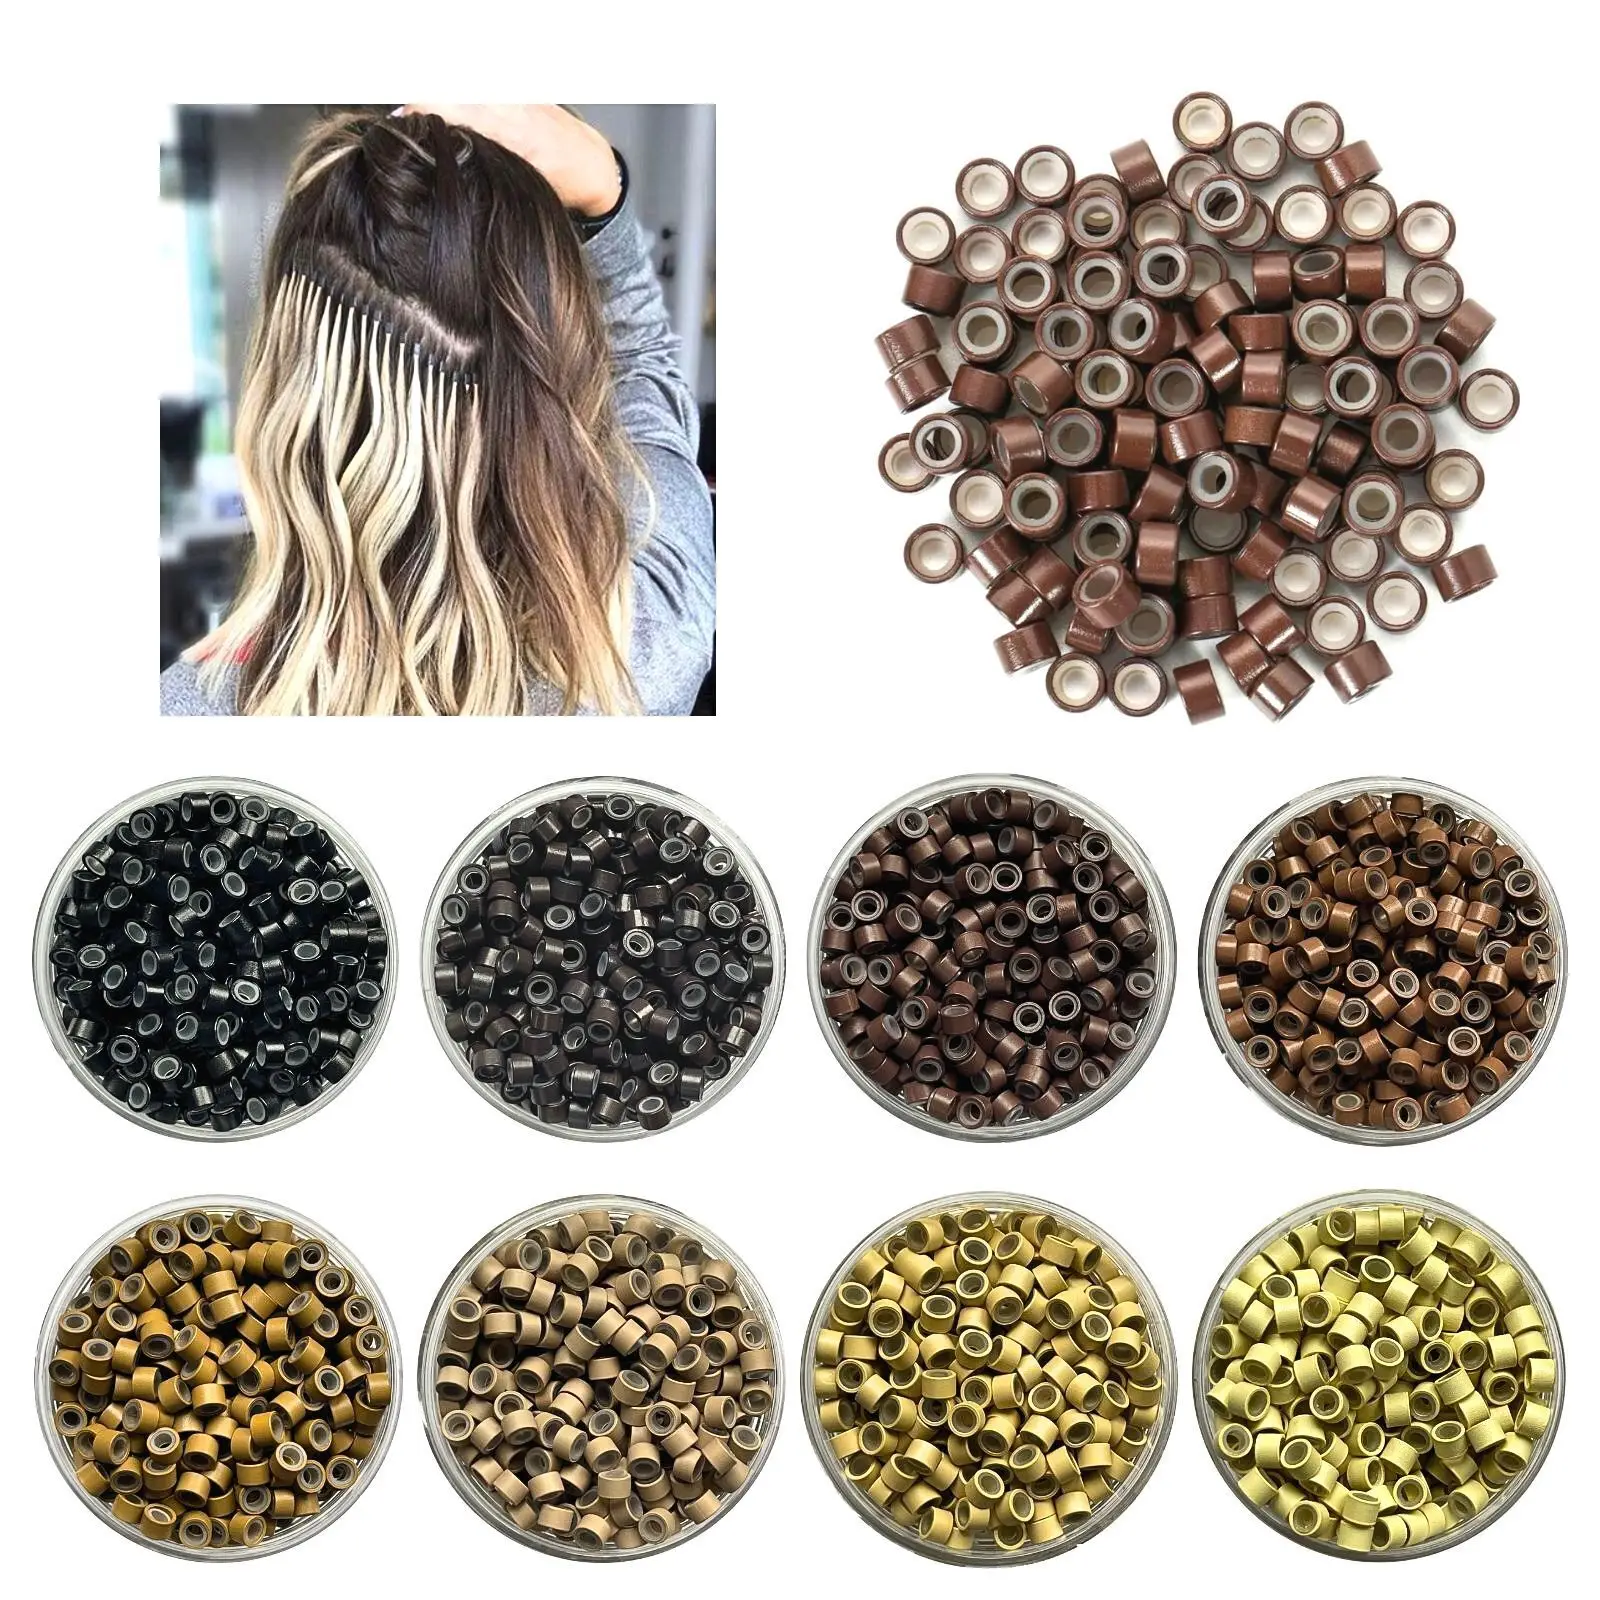 Silicone Micro Ring For Hair Extensions 5.0mmx3.0mmx3.0mm 10000Units Human Hair Micro Rings